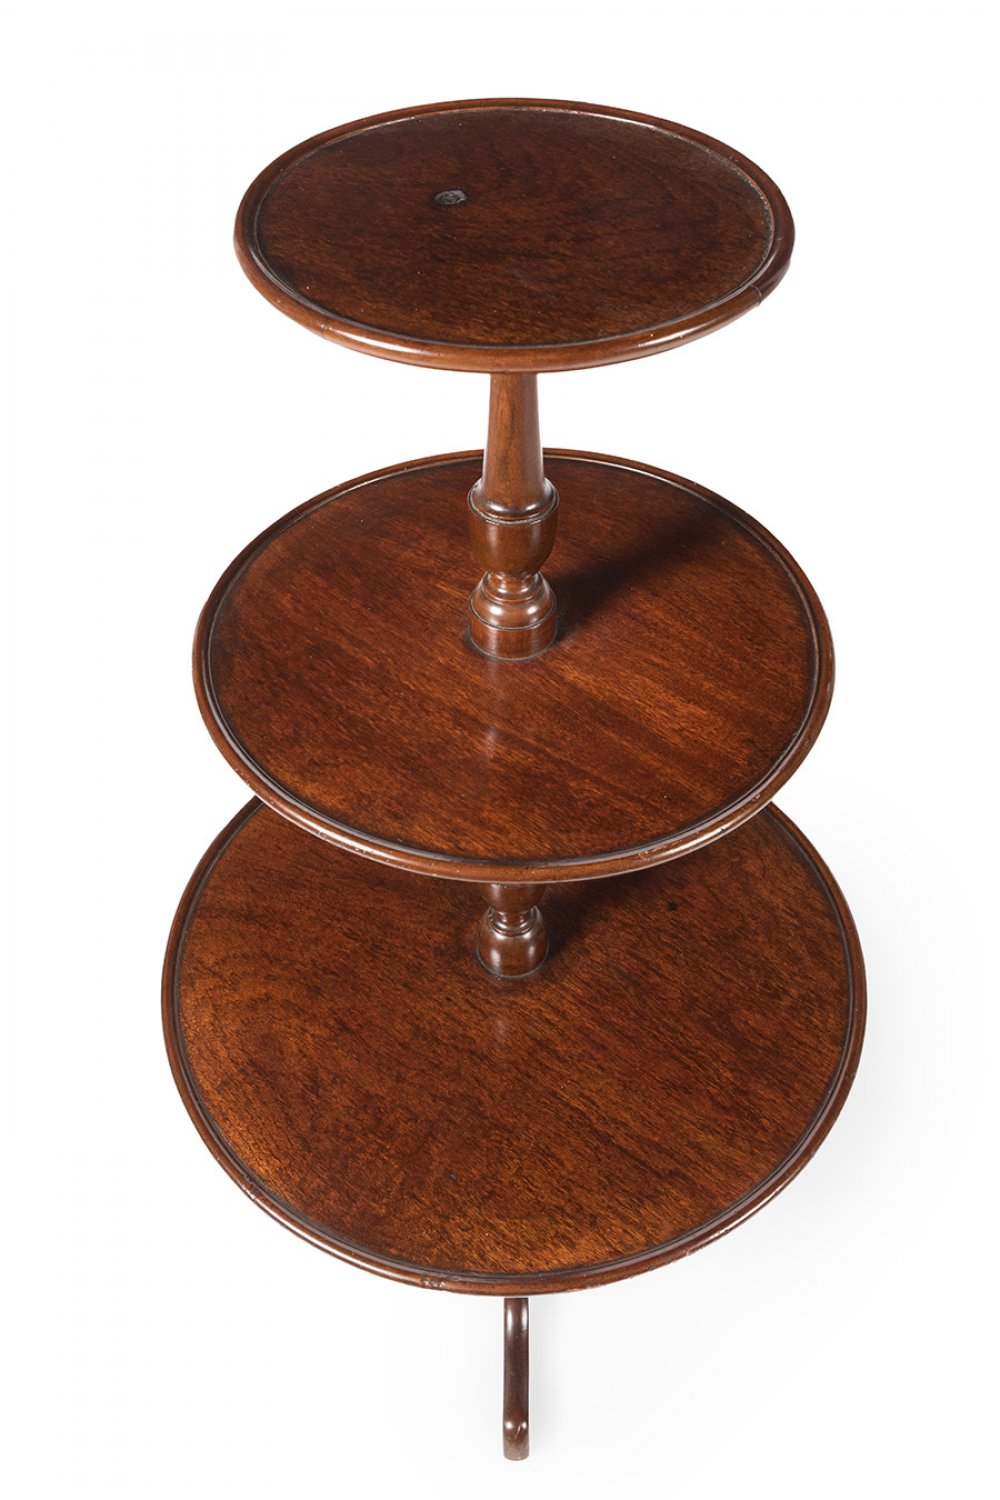 Mute servant on three levels. England, late 19th century.Mahogany wood.Slightly missing at the top. - Image 4 of 5